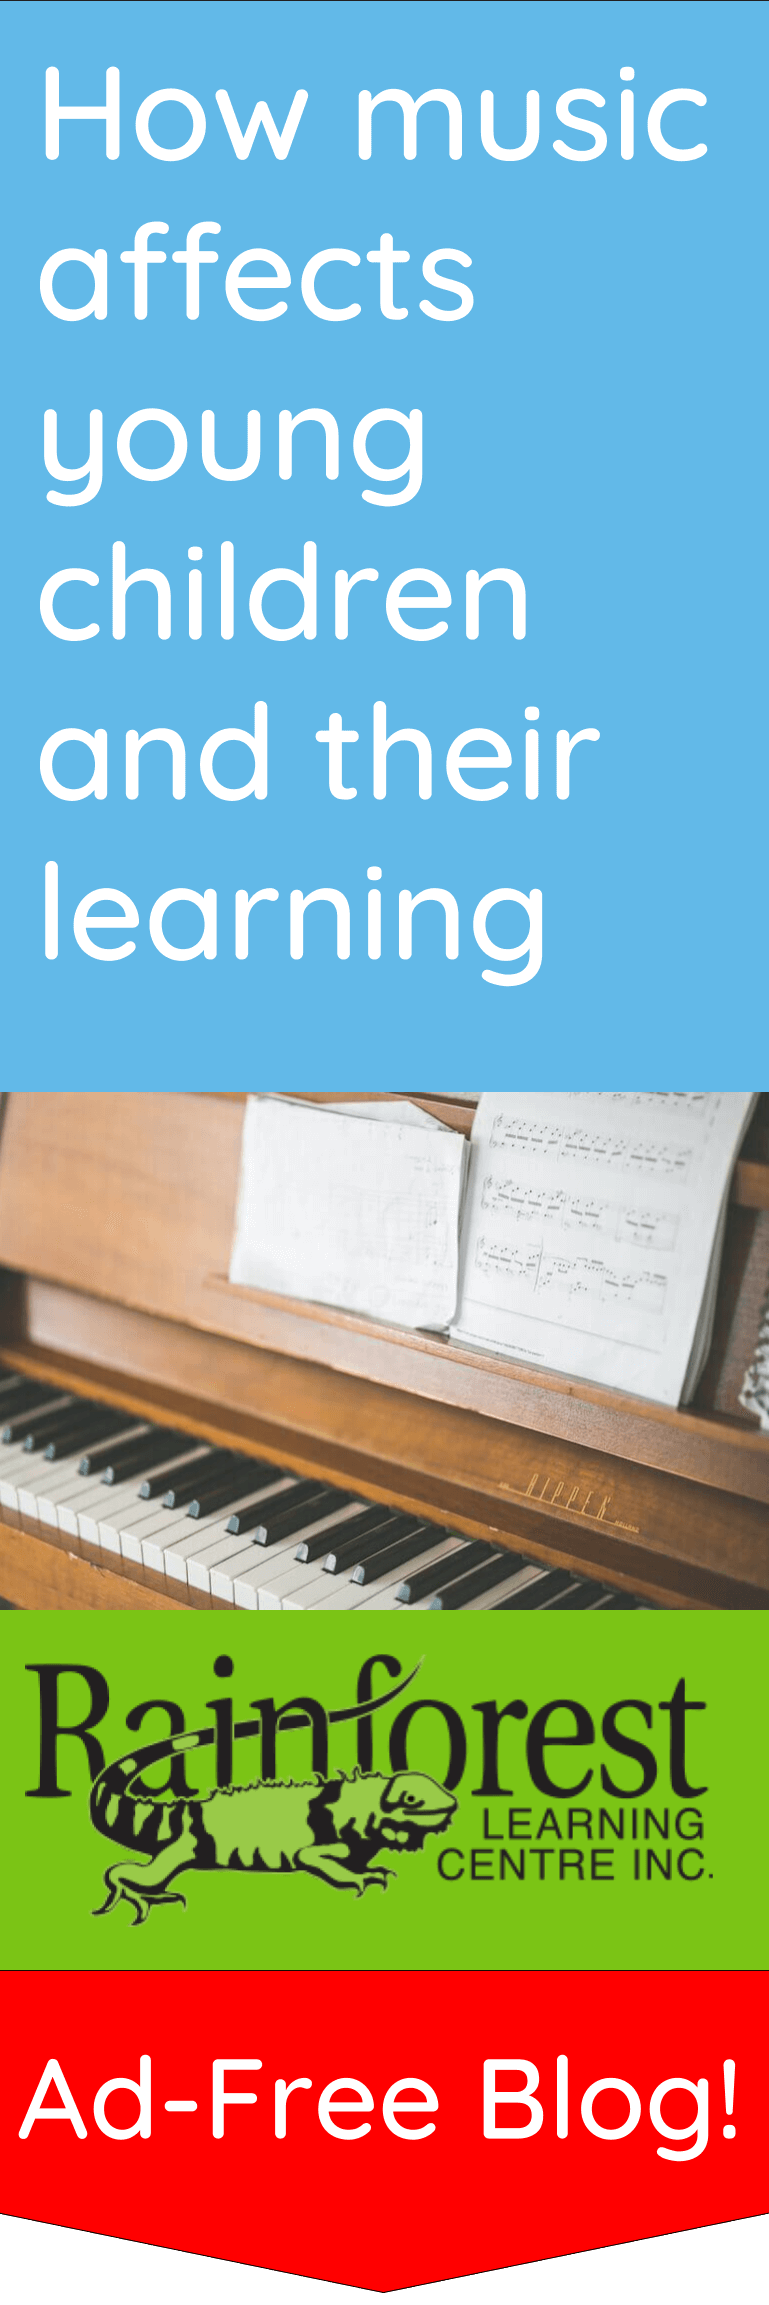 how music affects young children and their learning - article pinterest image